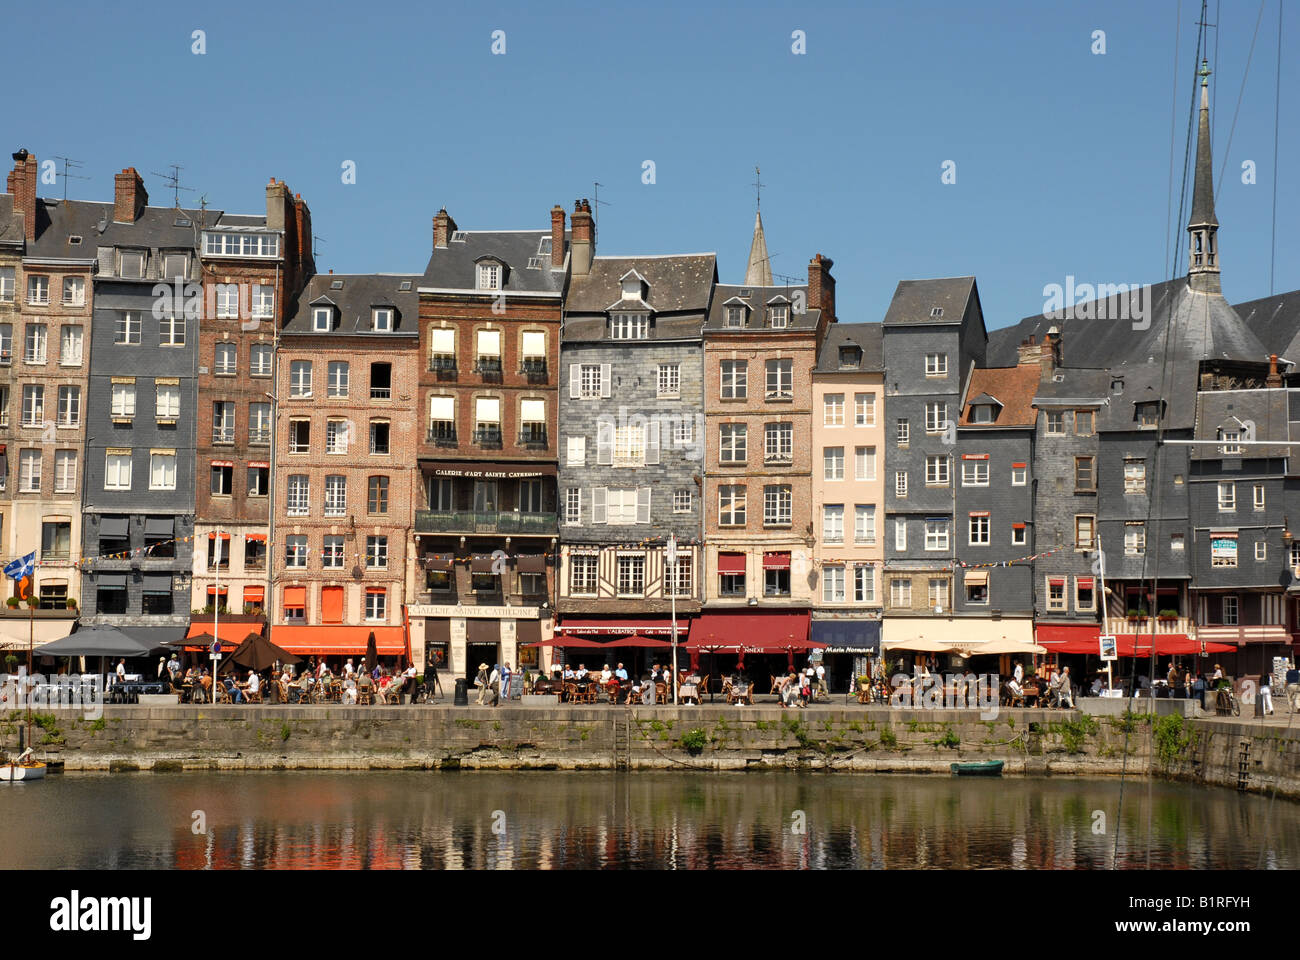 Waterfront buildings lining the harbor,  Le Vieux Bassin, Honfleur, France Stock Photo